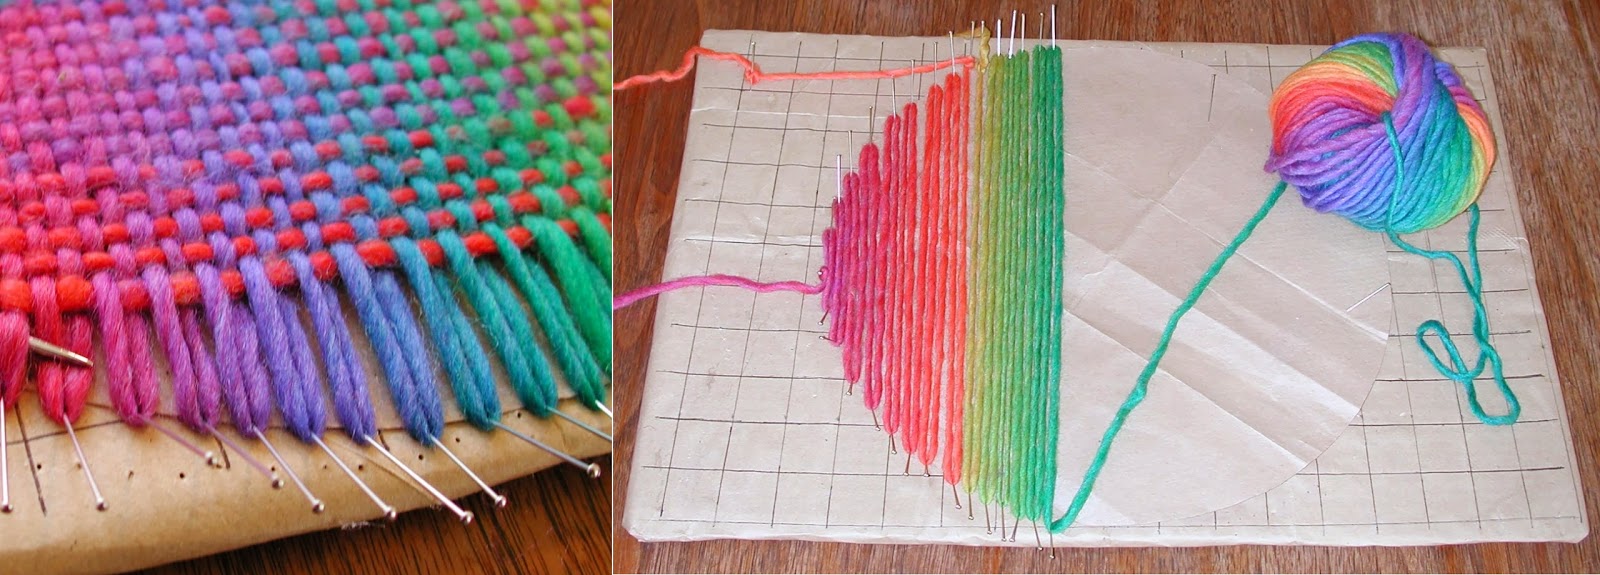 Pin Loom Weaving: Pin loom weaving in the round (with a dash of knitting)